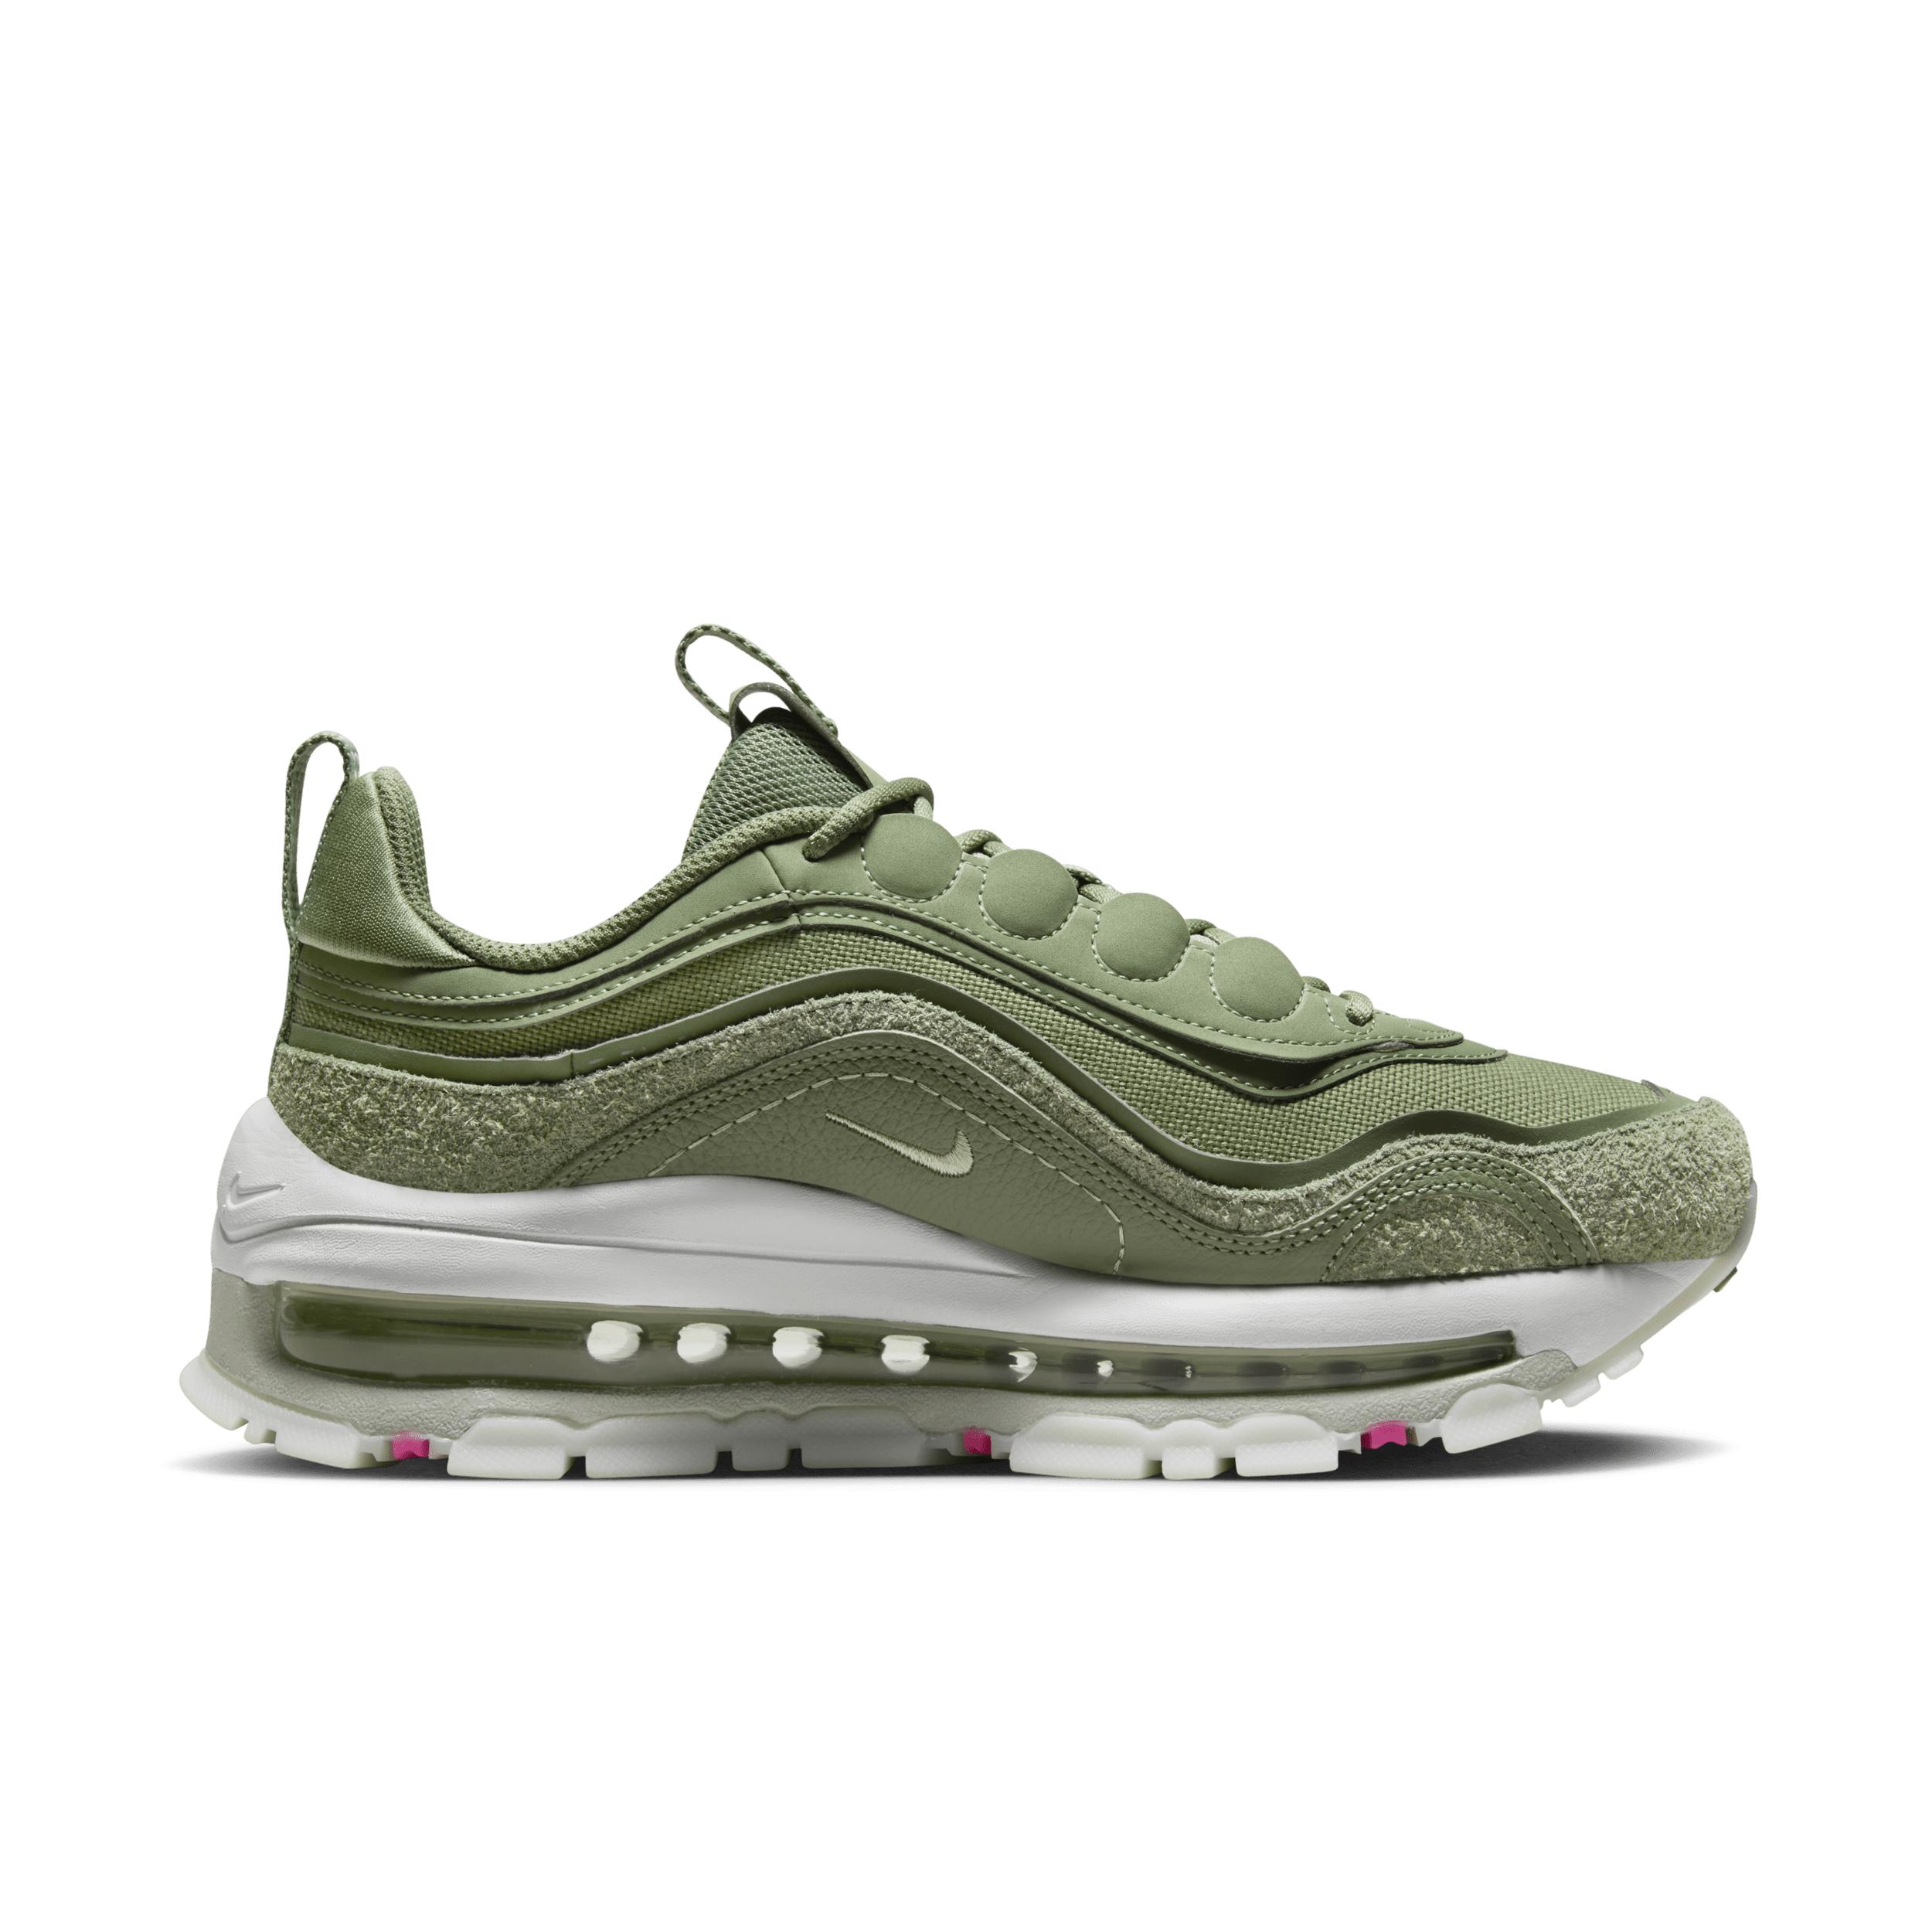 Nike Air Max 97 Futura Shoes in Green | Lyst UK